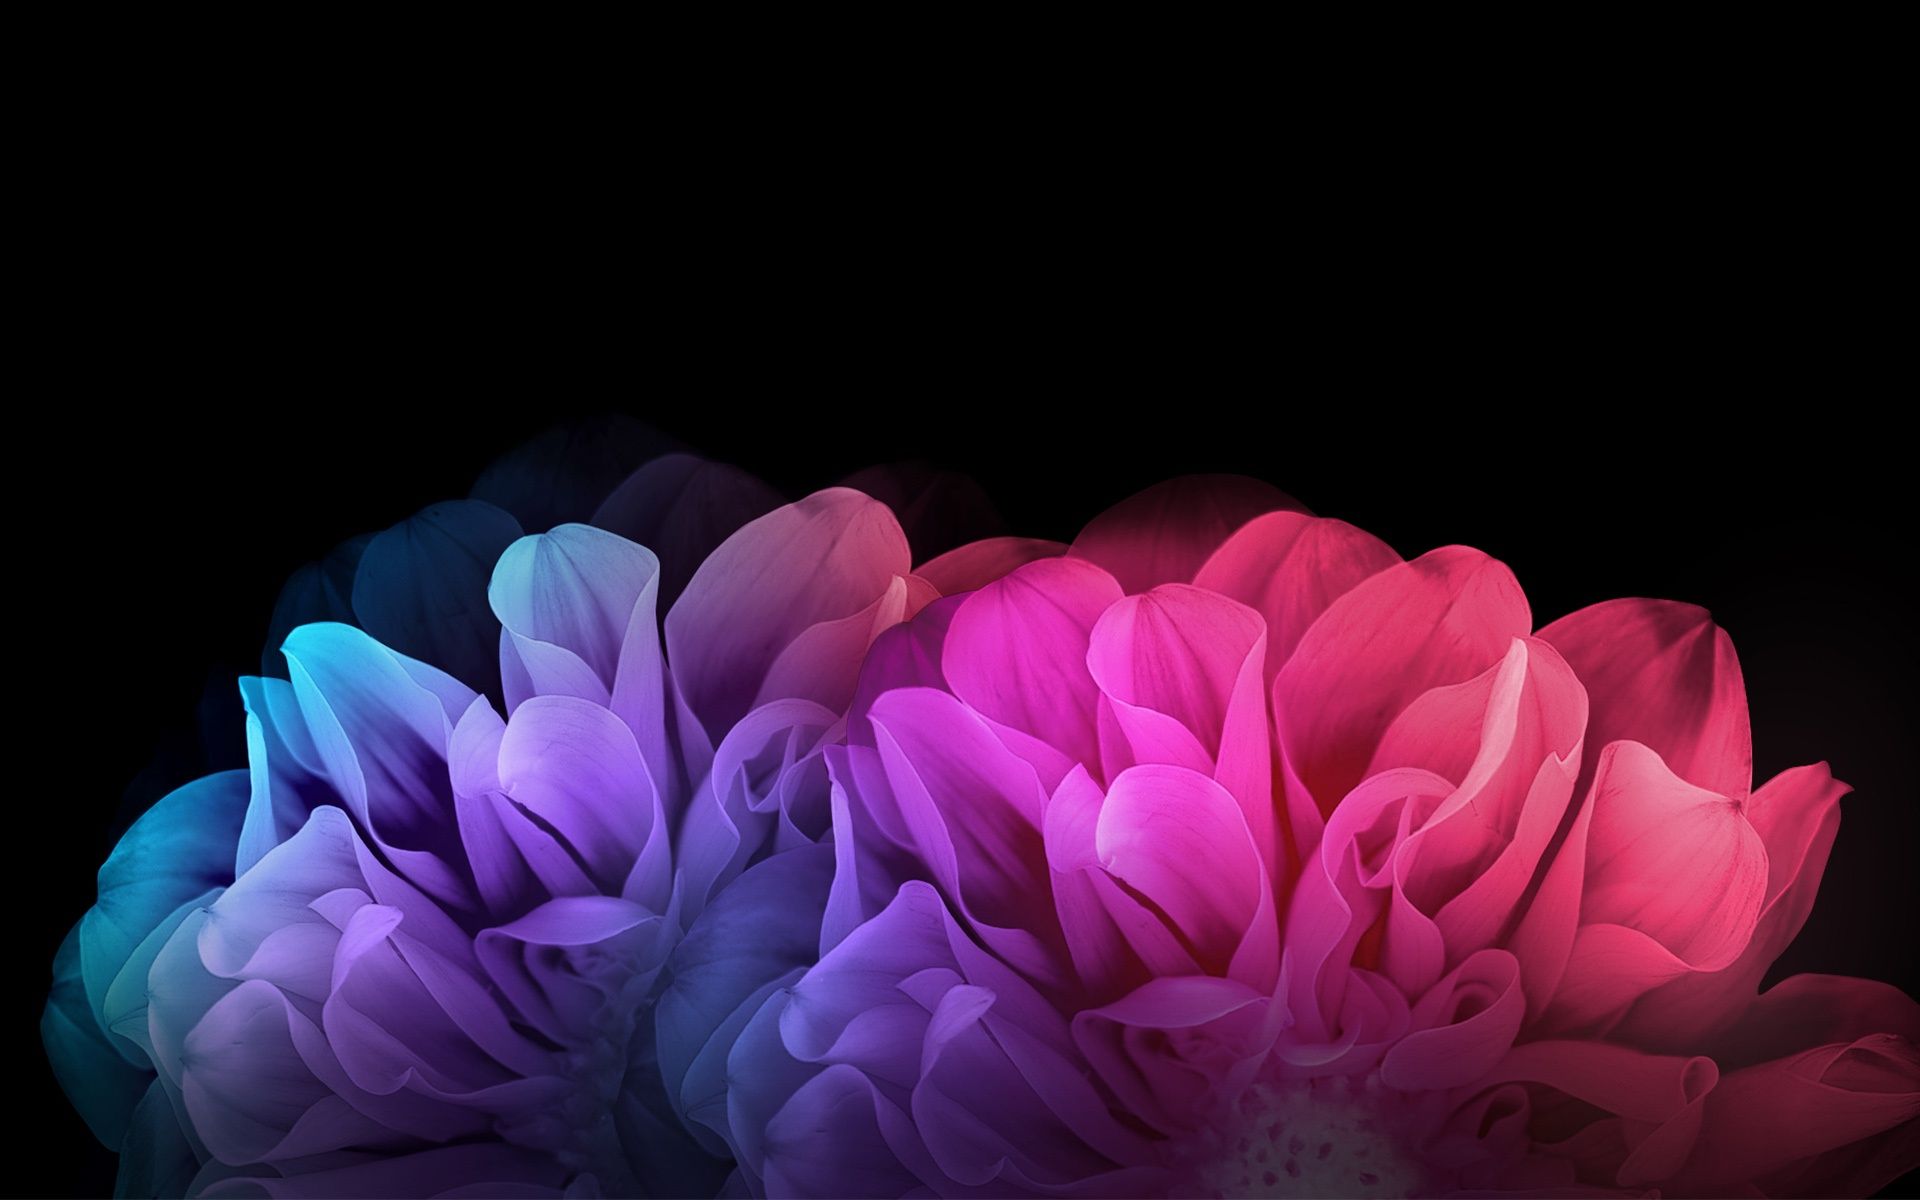 Colorful Flowers Dark Background Wallpaper in jpg format for free